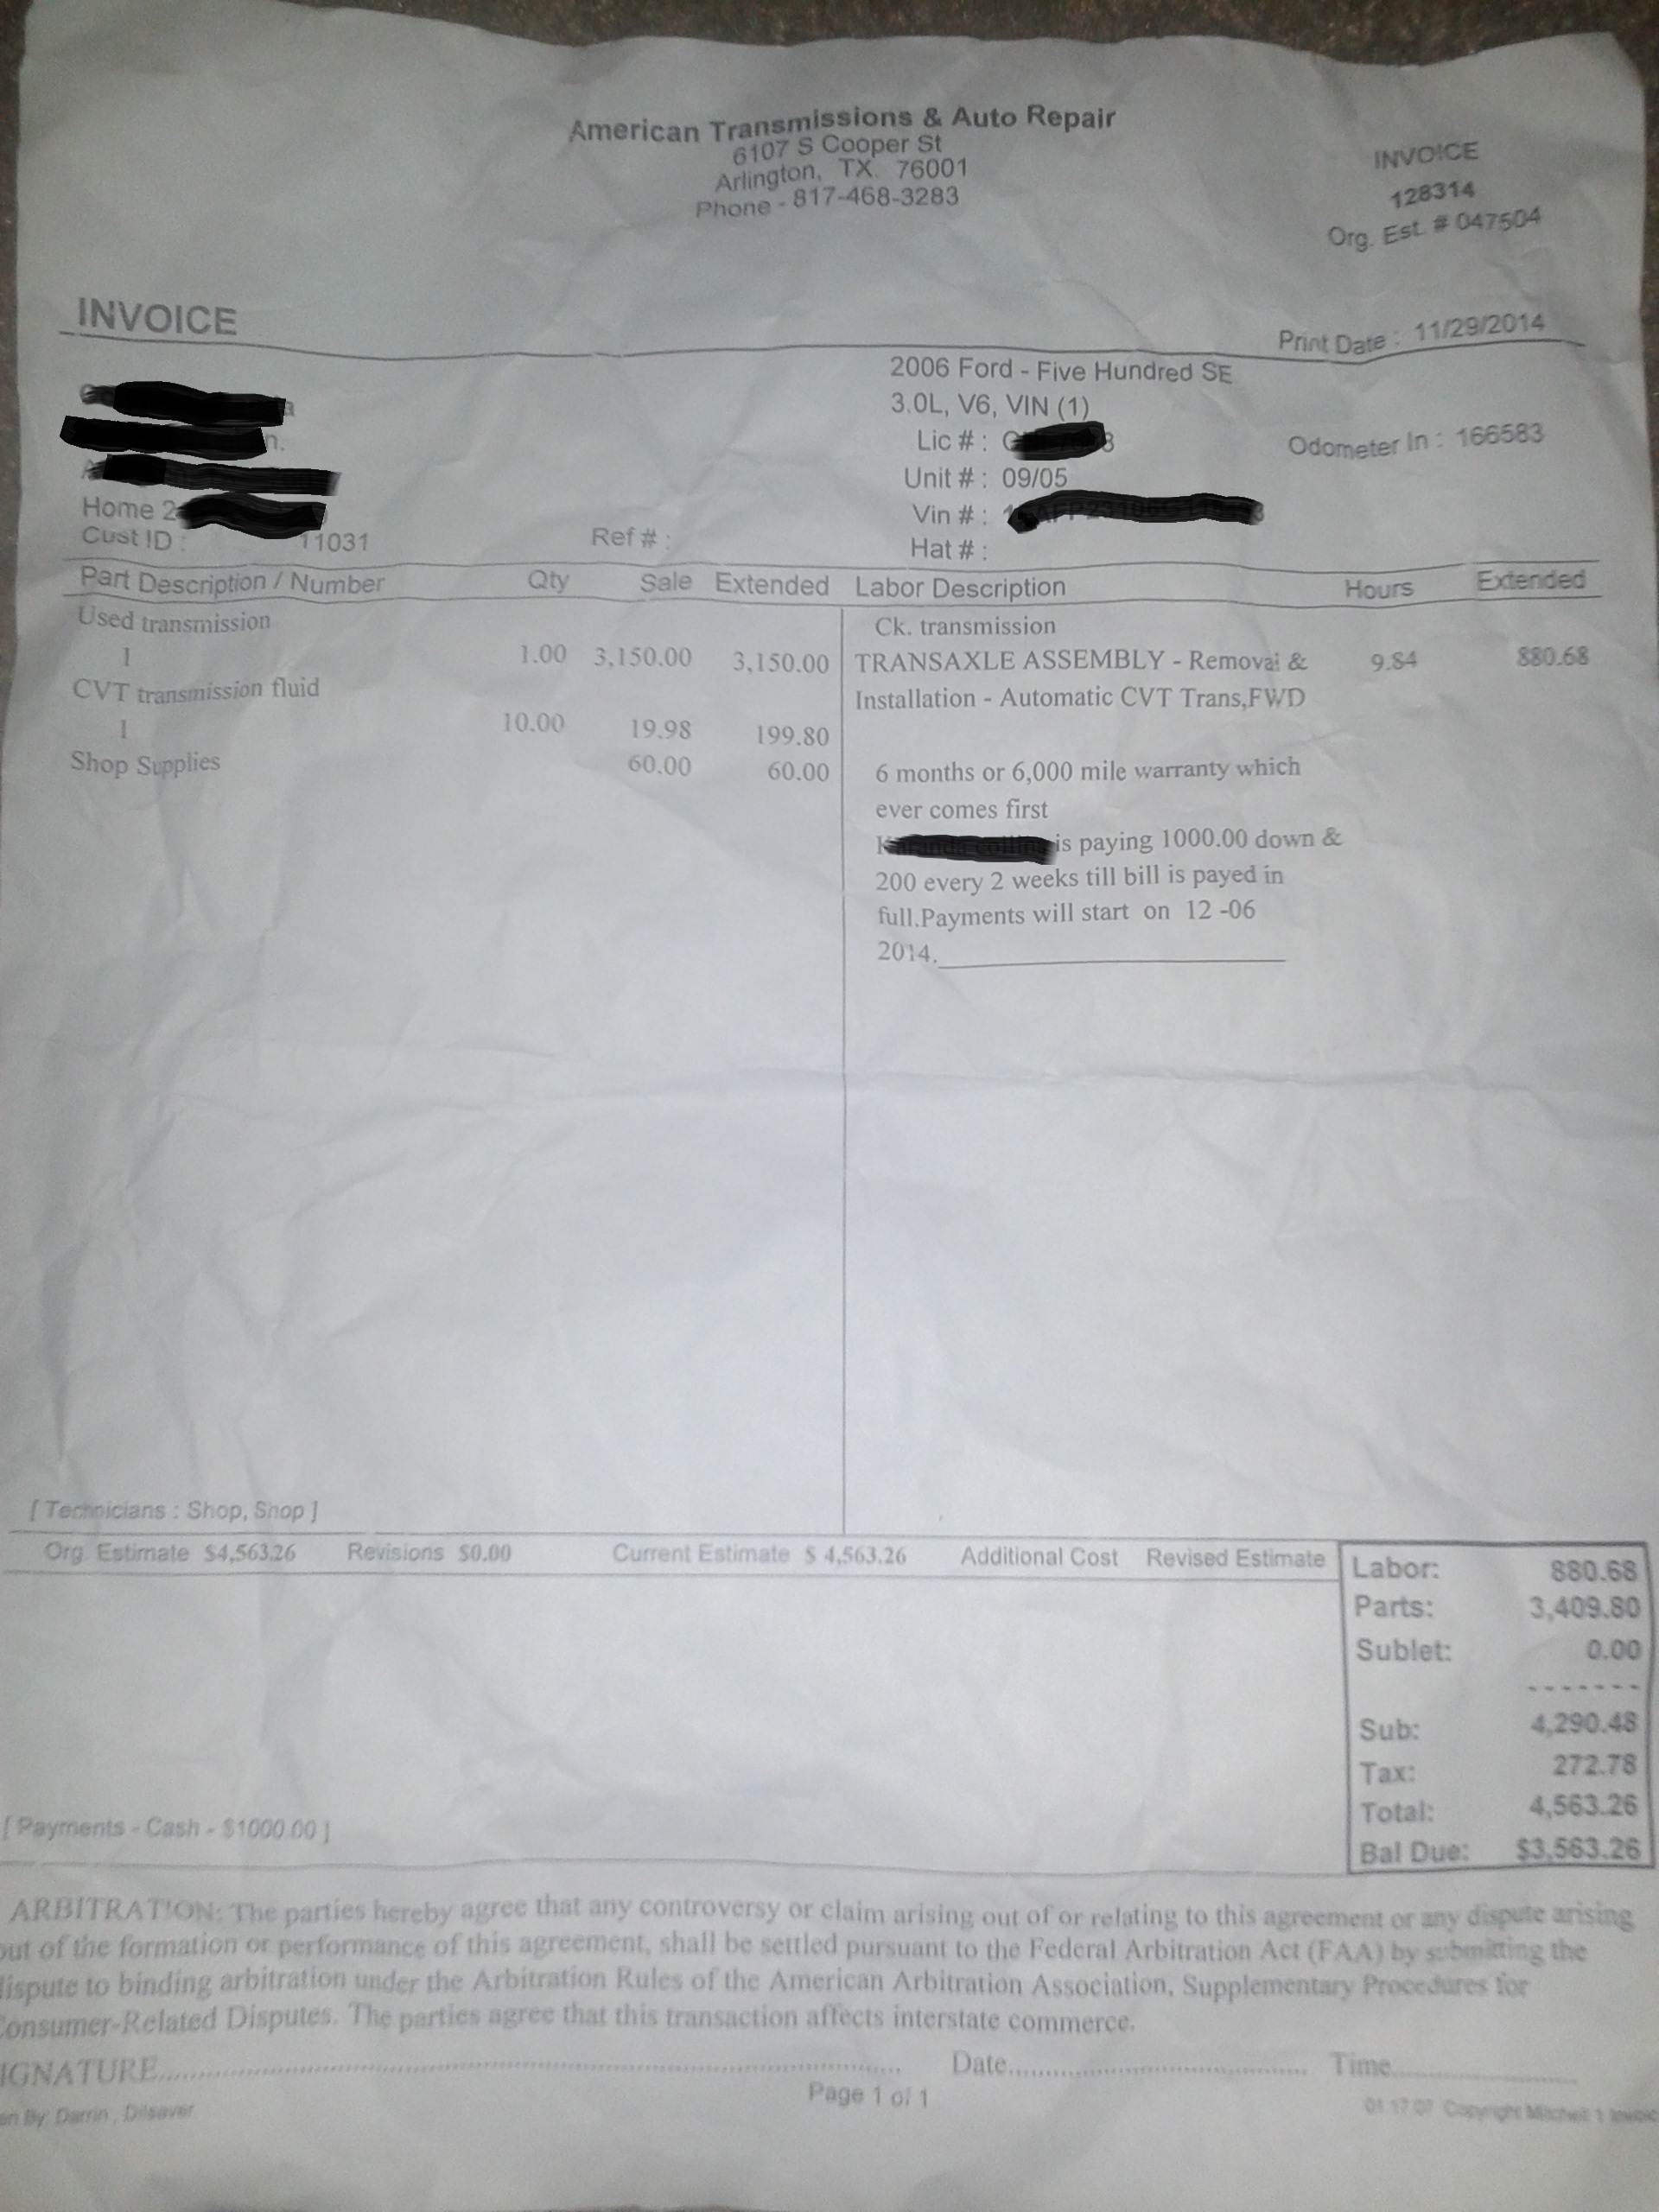 Invoice- that states I'm paying $1000 down, and $200 biweekly. 